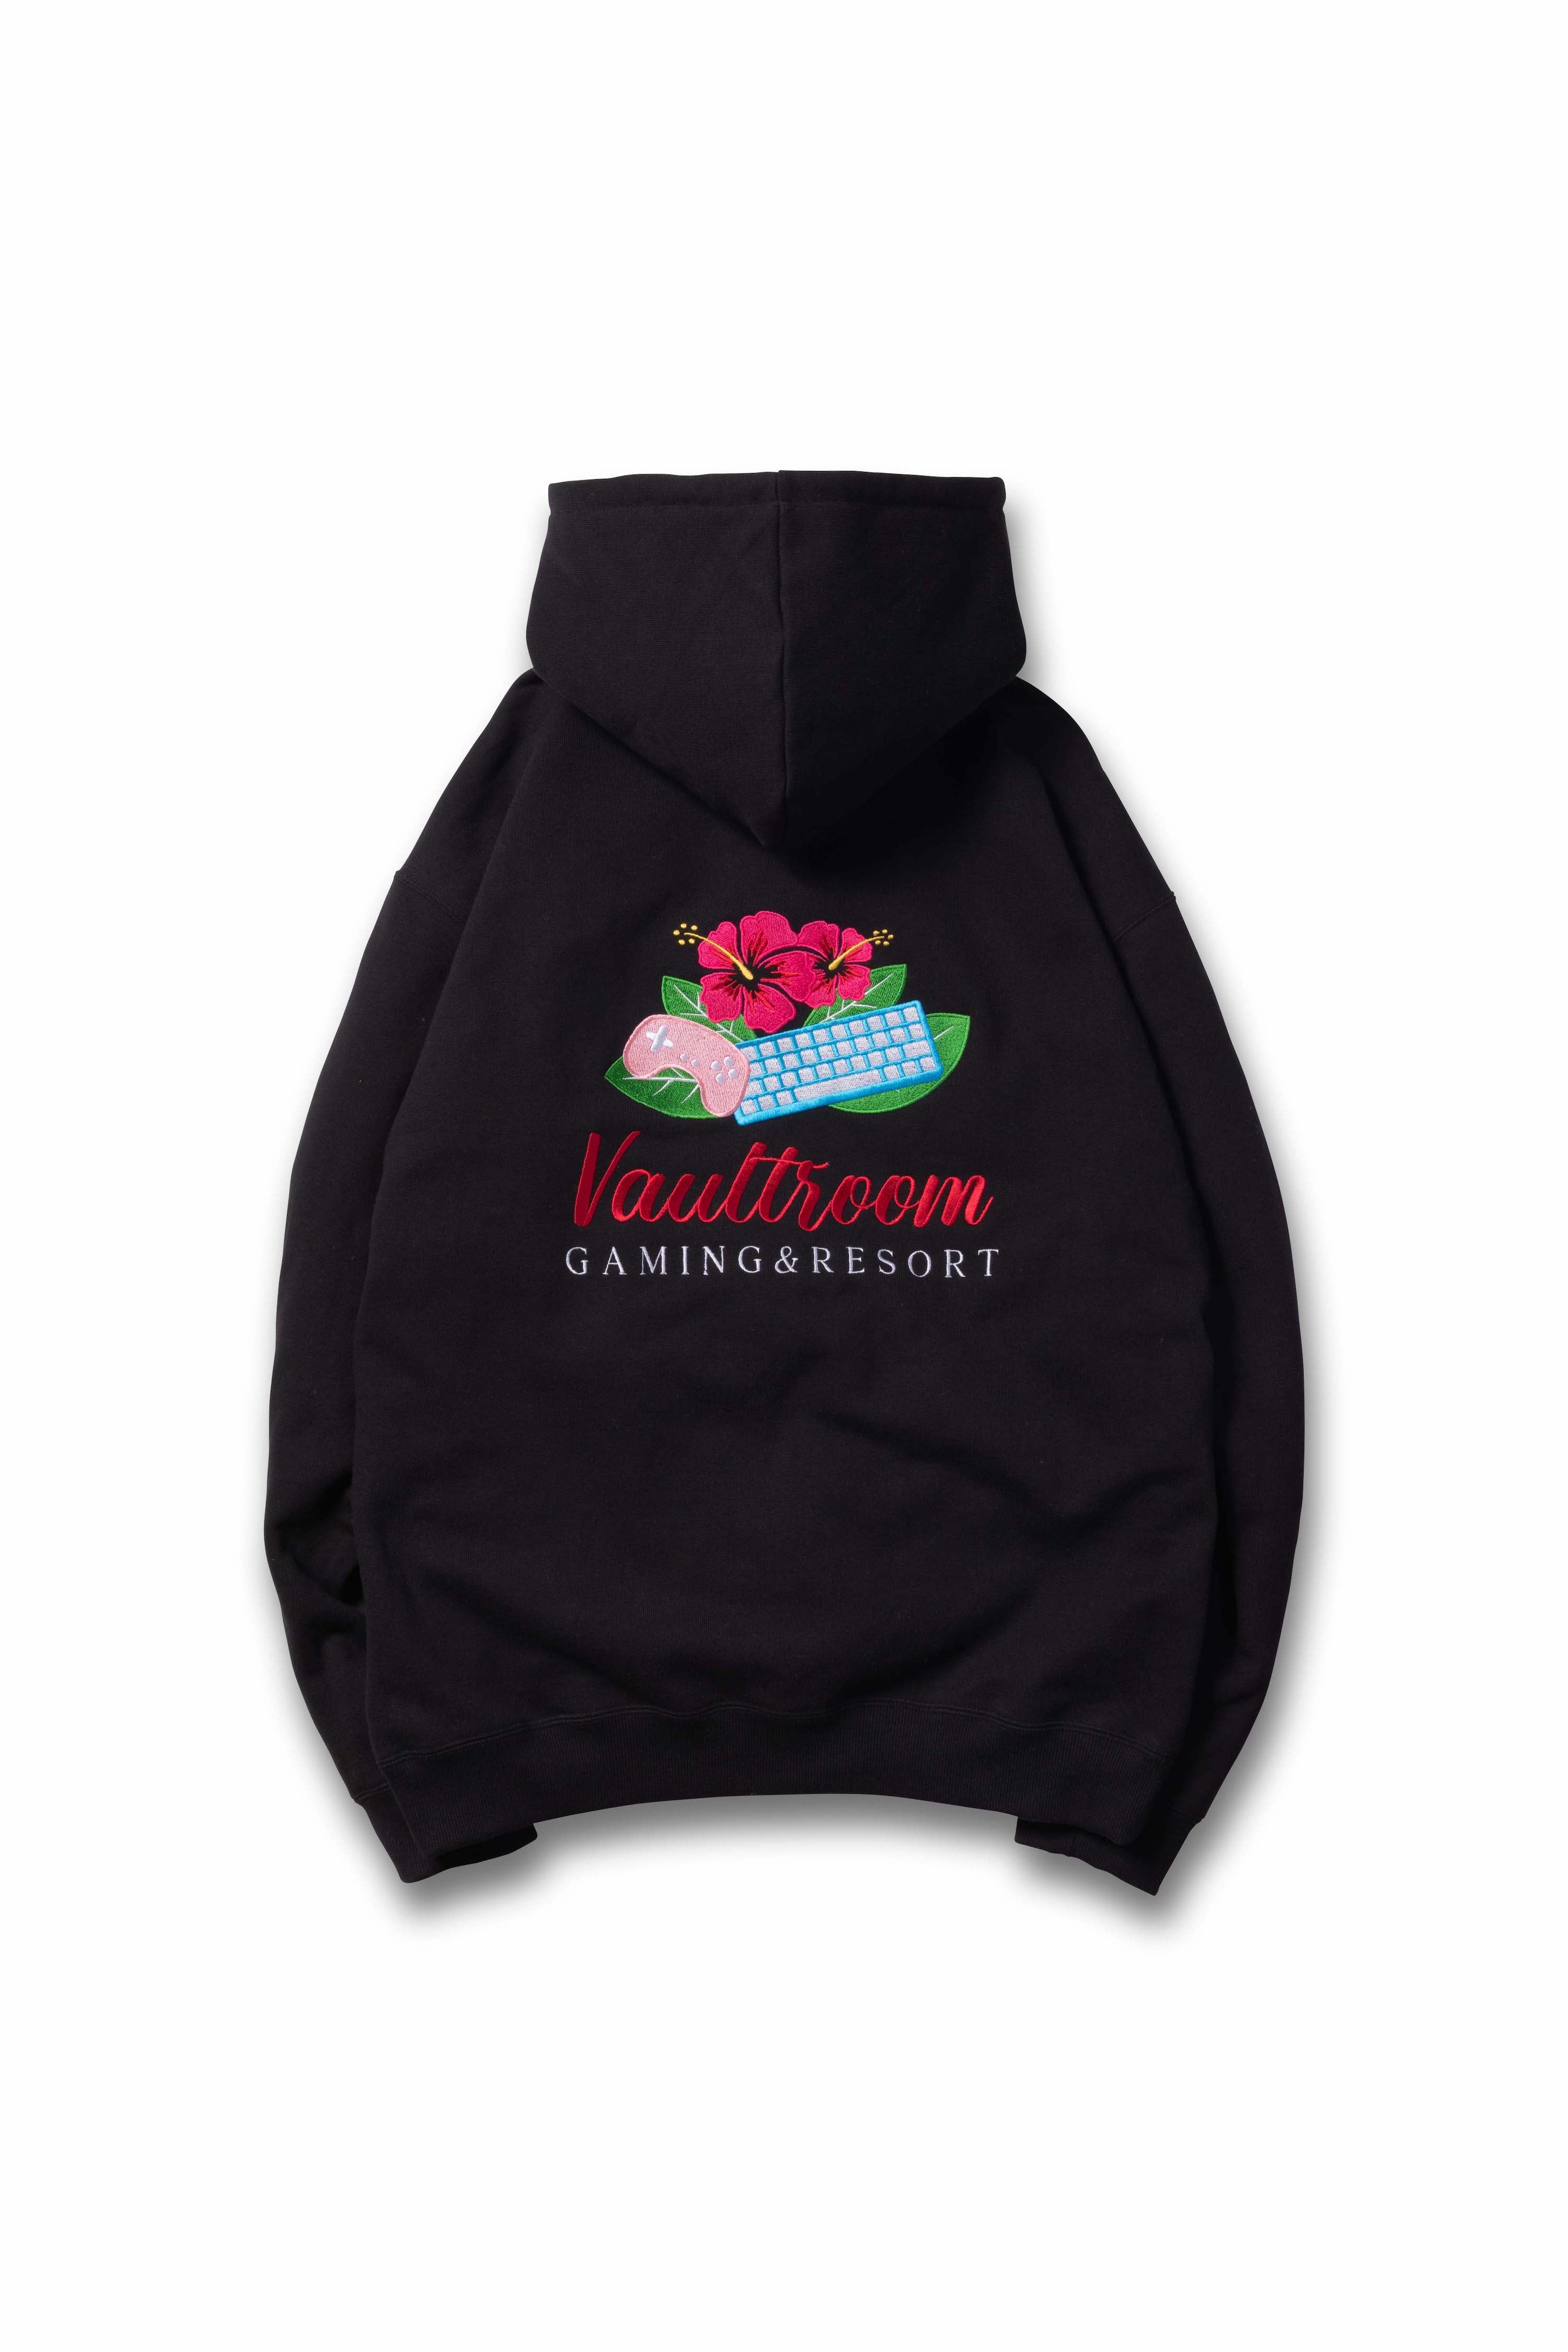 vaultroom × Selly Hoodie BLK Size XL